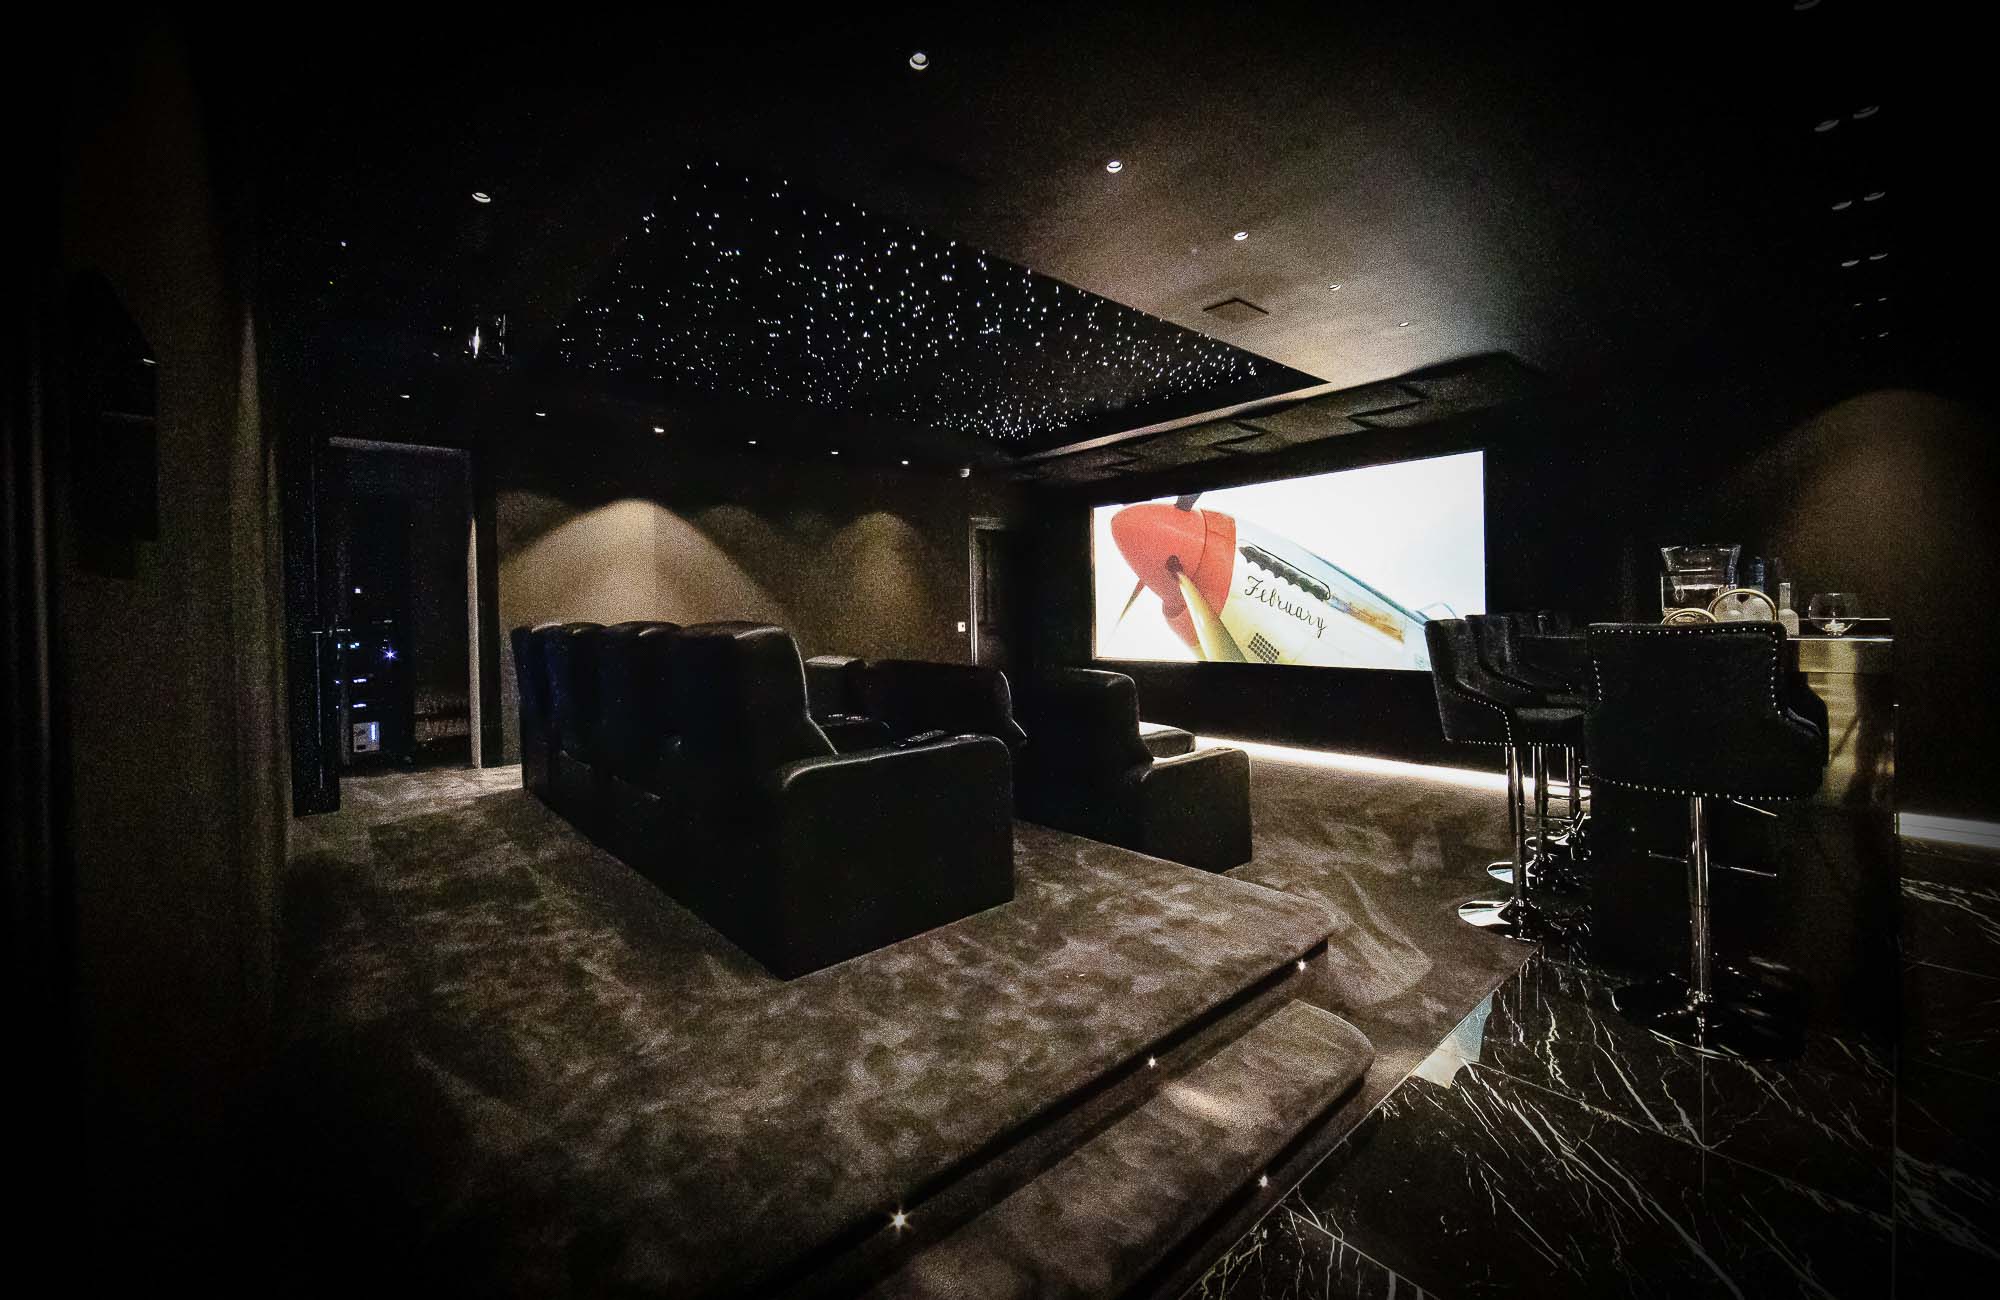 Home Cinema Installation and Design - London and Home Counties